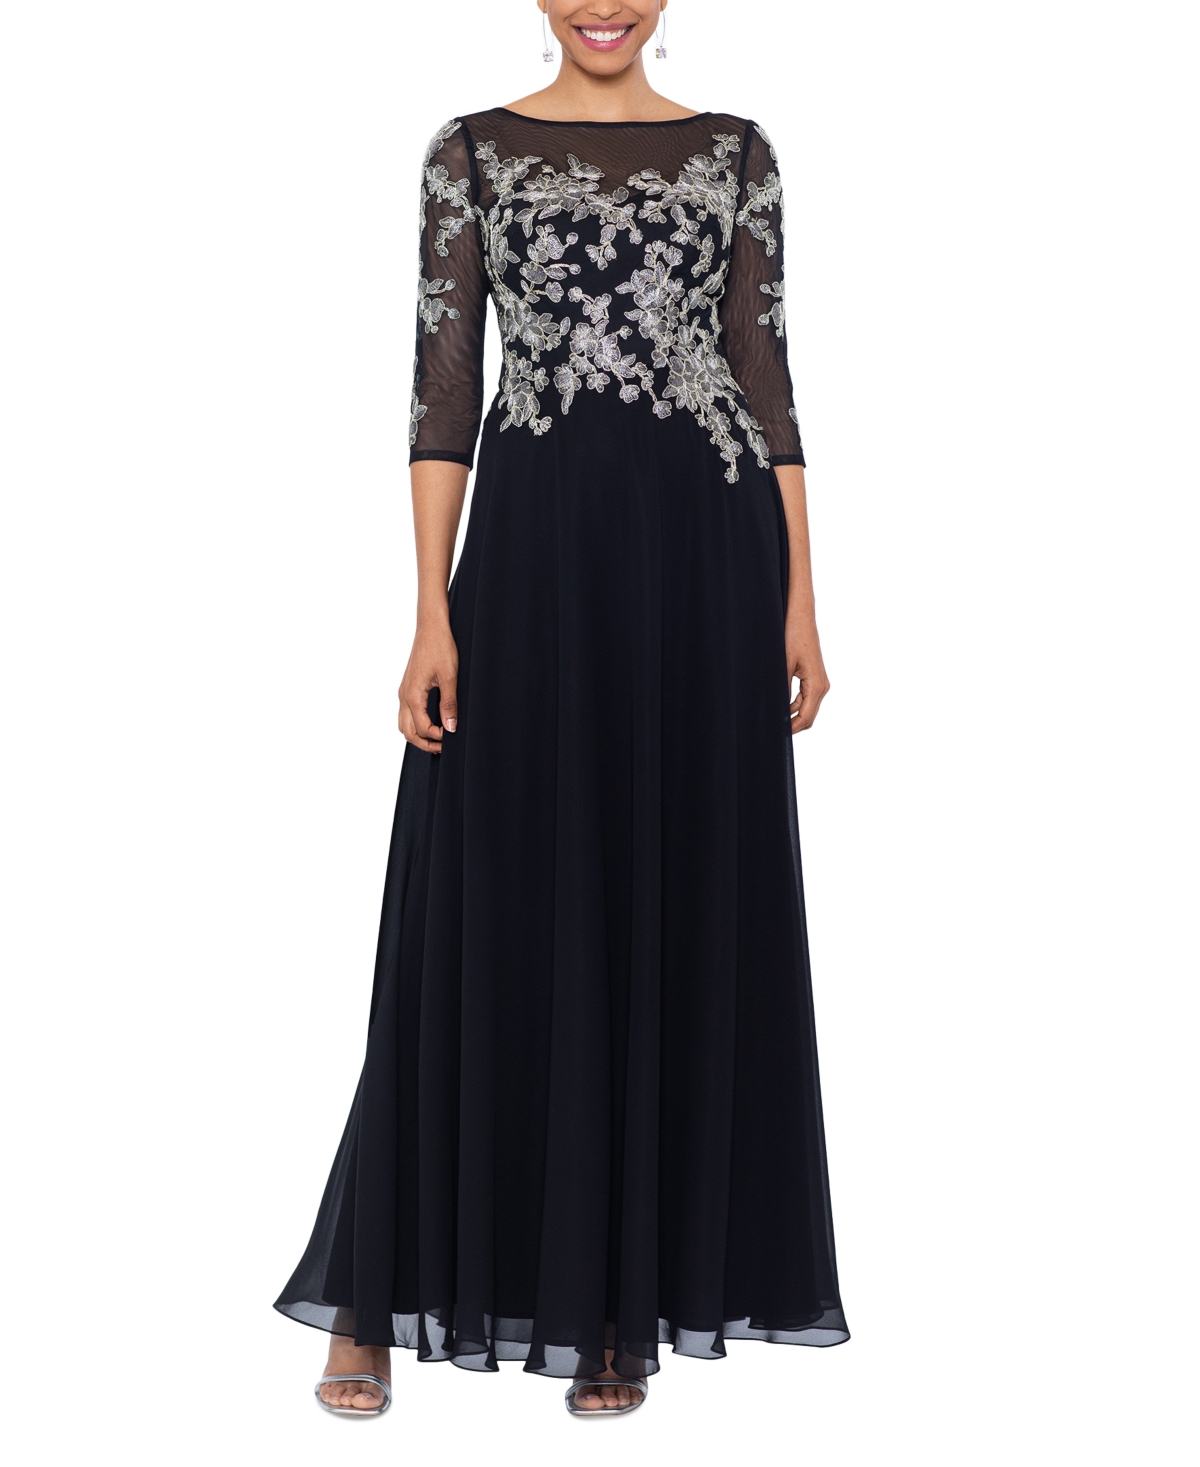 Women's Floral-Embroidered 3/4-Sleeve Gown - Black/Gold